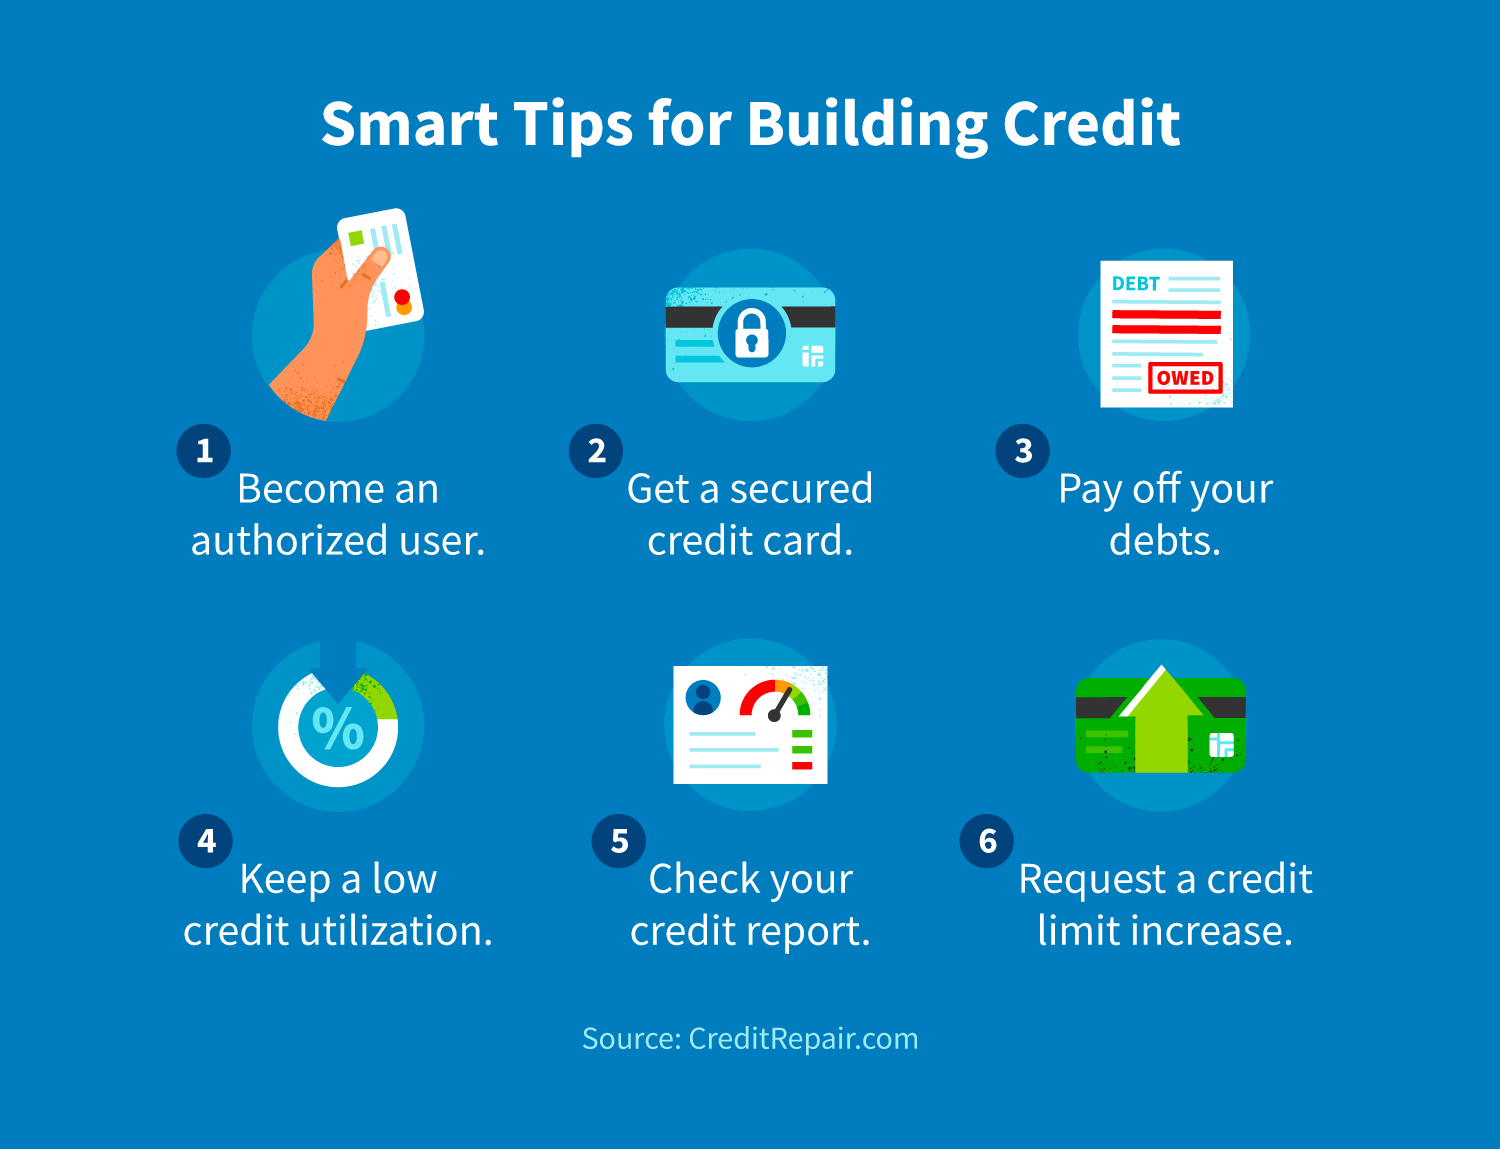 How Long Does It Take to Build Credit? - CreditRepair.com